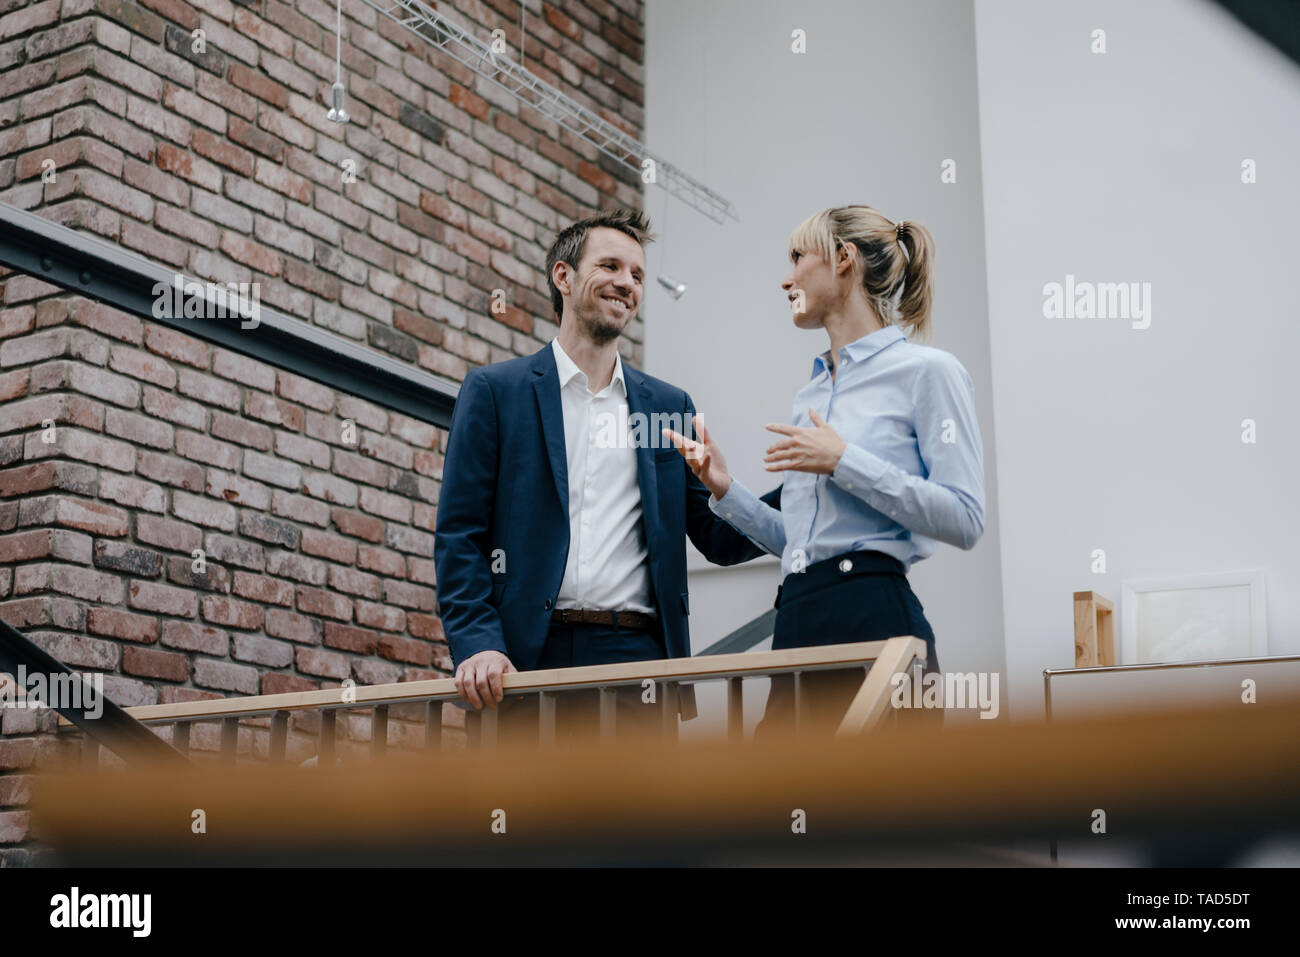 Businessman and woman standing in office building, discussing Stock Photo